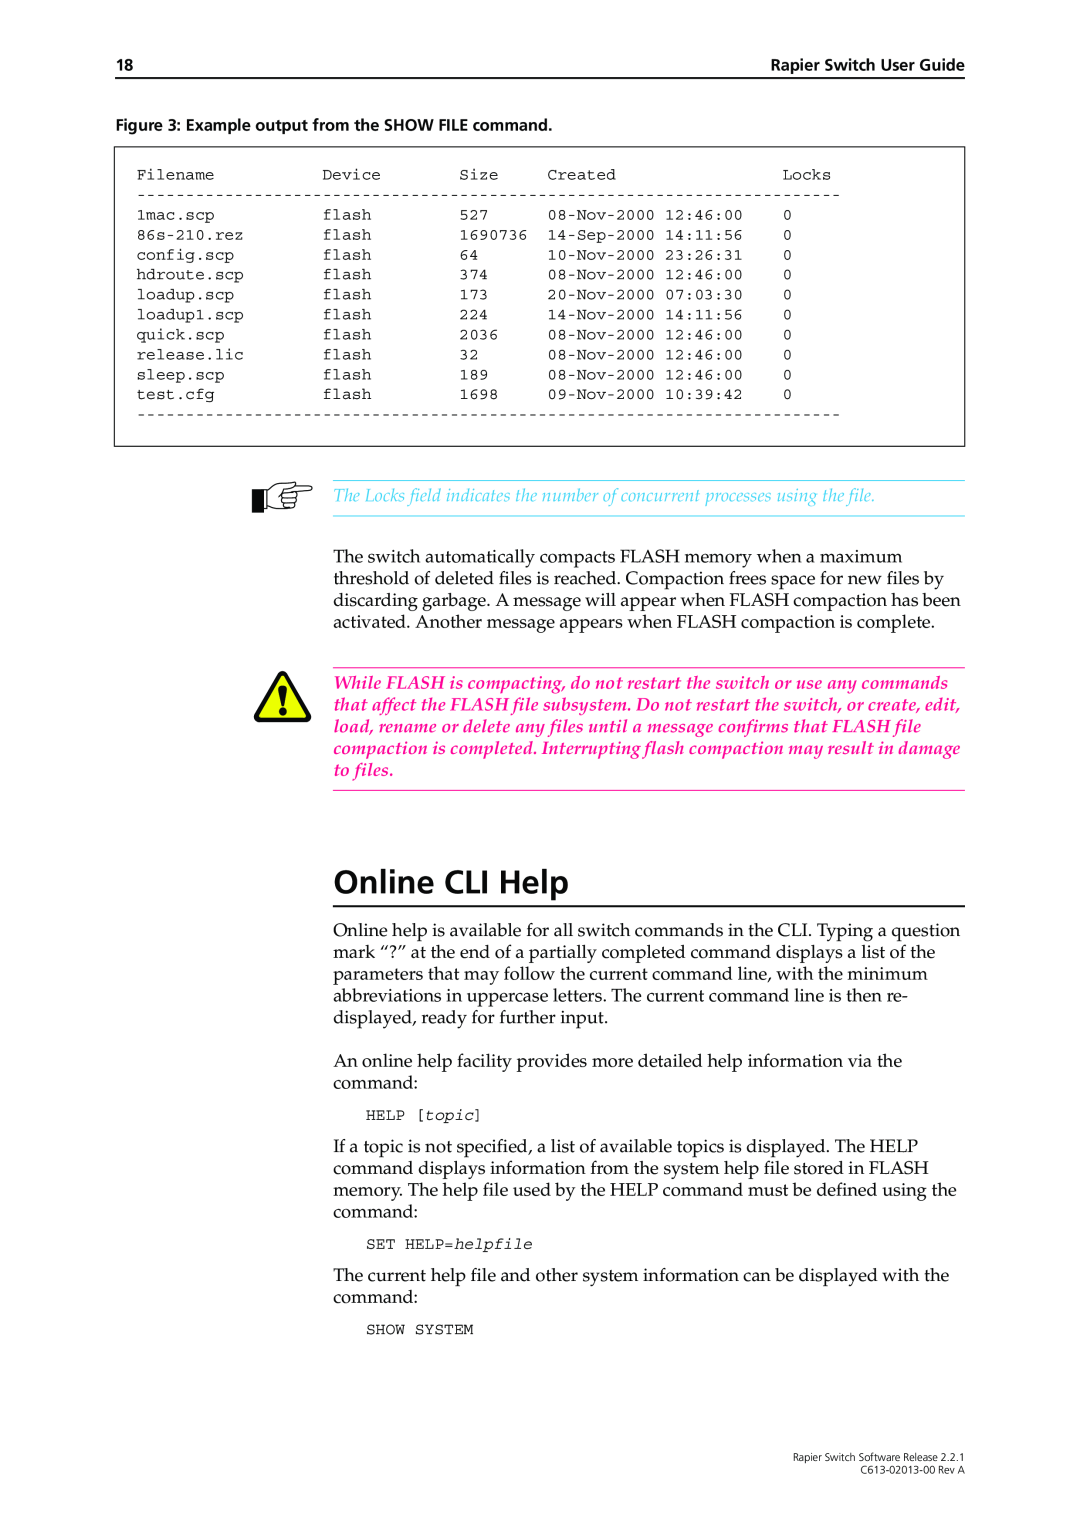 Allied Telesis C613-02013-00 manual Online CLI Help, Example output from the SHOW FILE command 